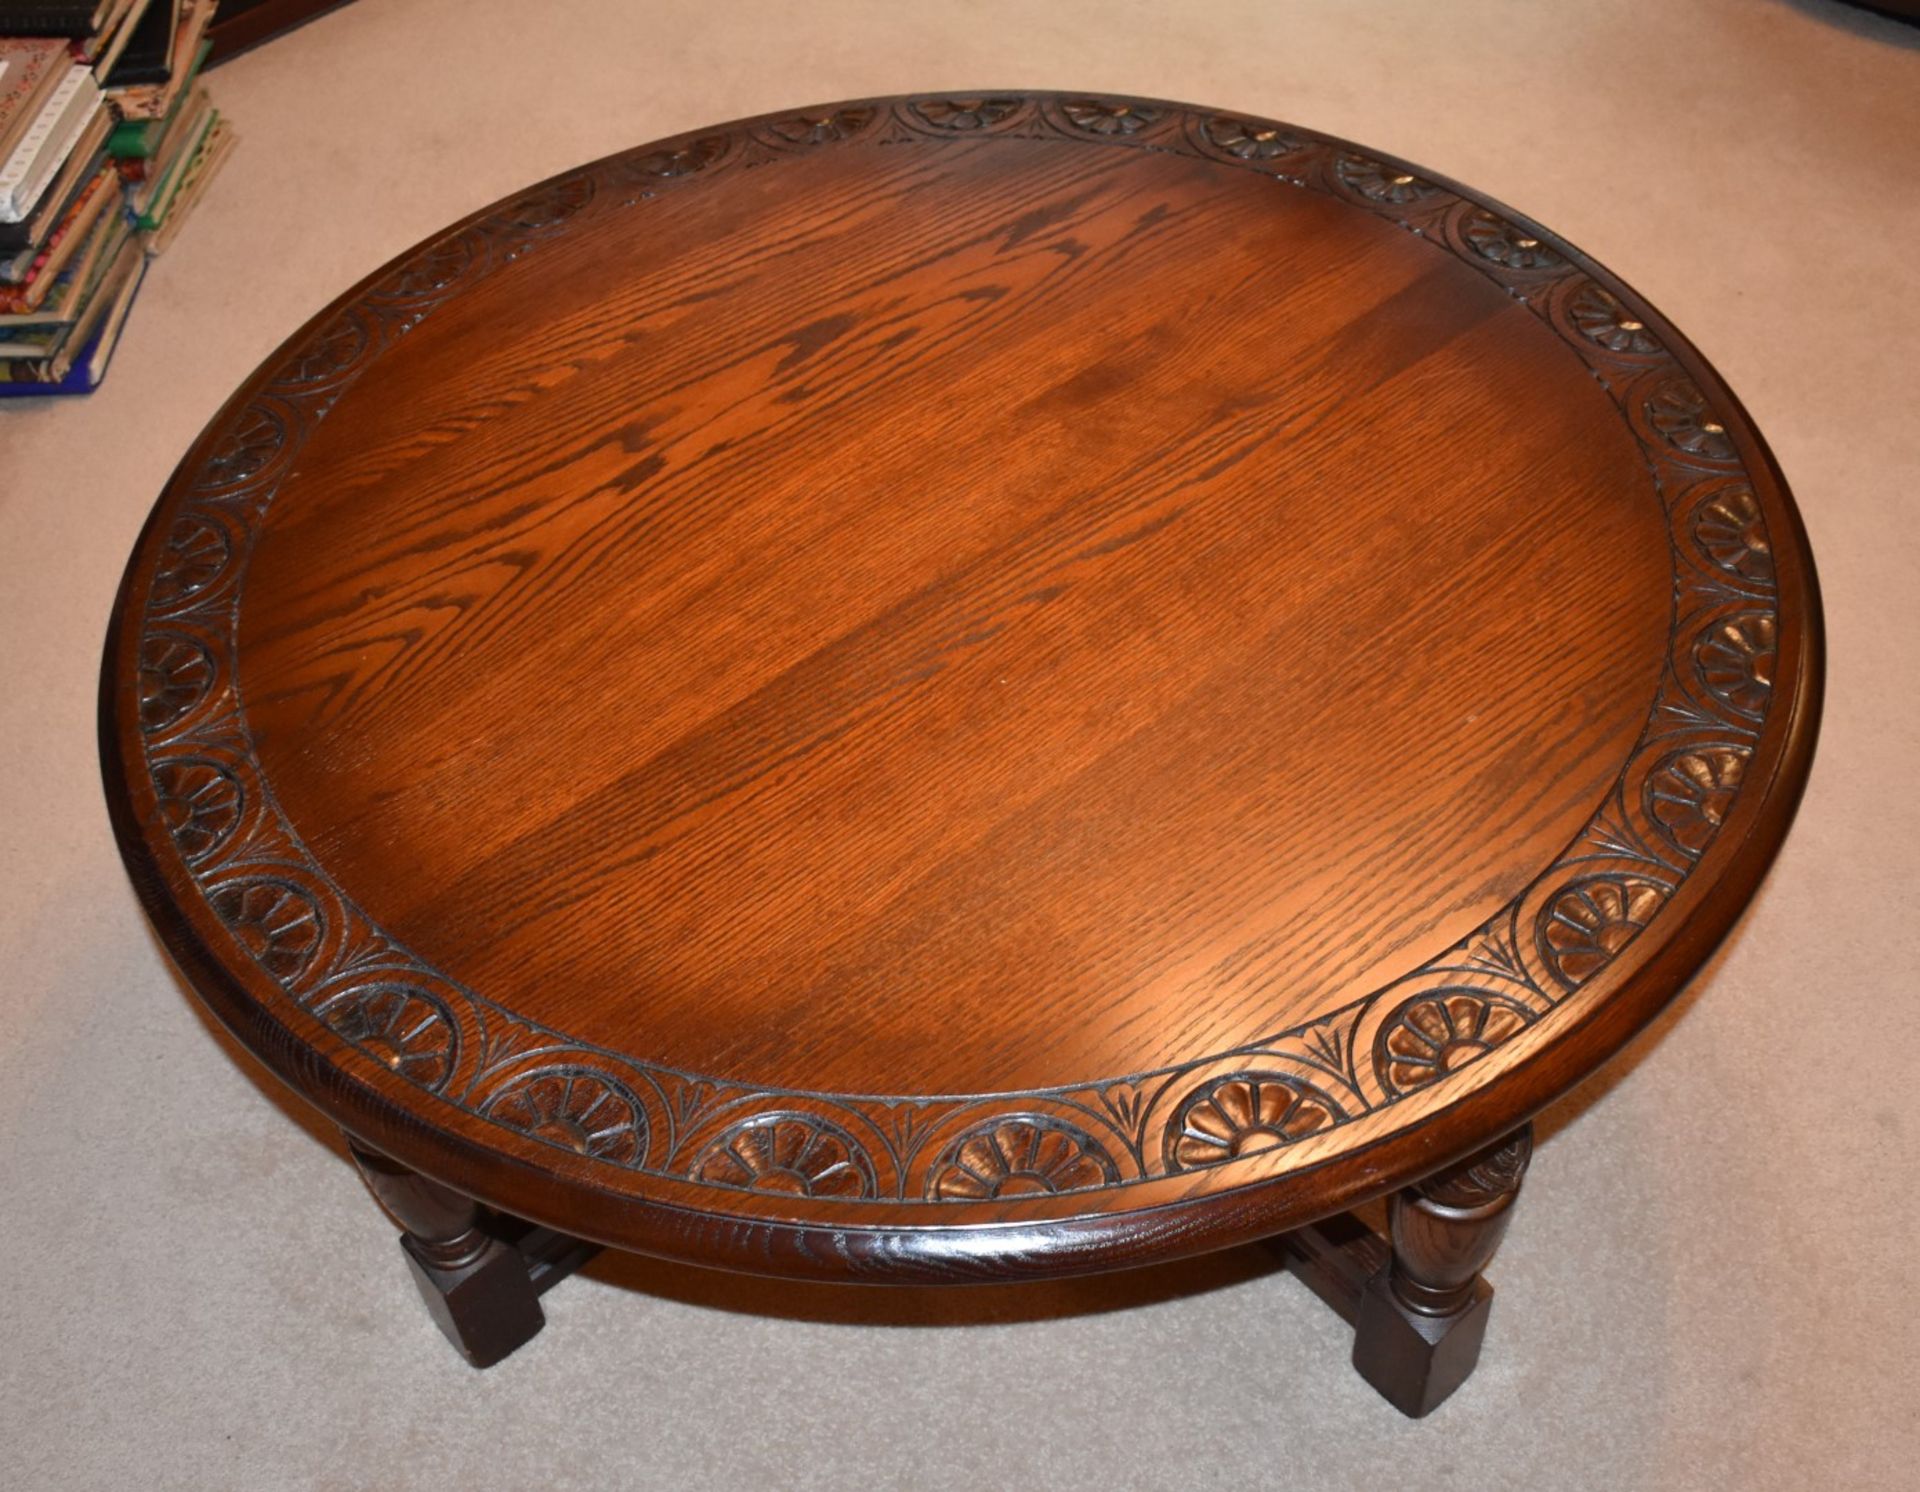 1 x Round Carved Oak Coffee Table By Jaycee - JacobeanStyle With Turned Legs, Joining Stretchers and